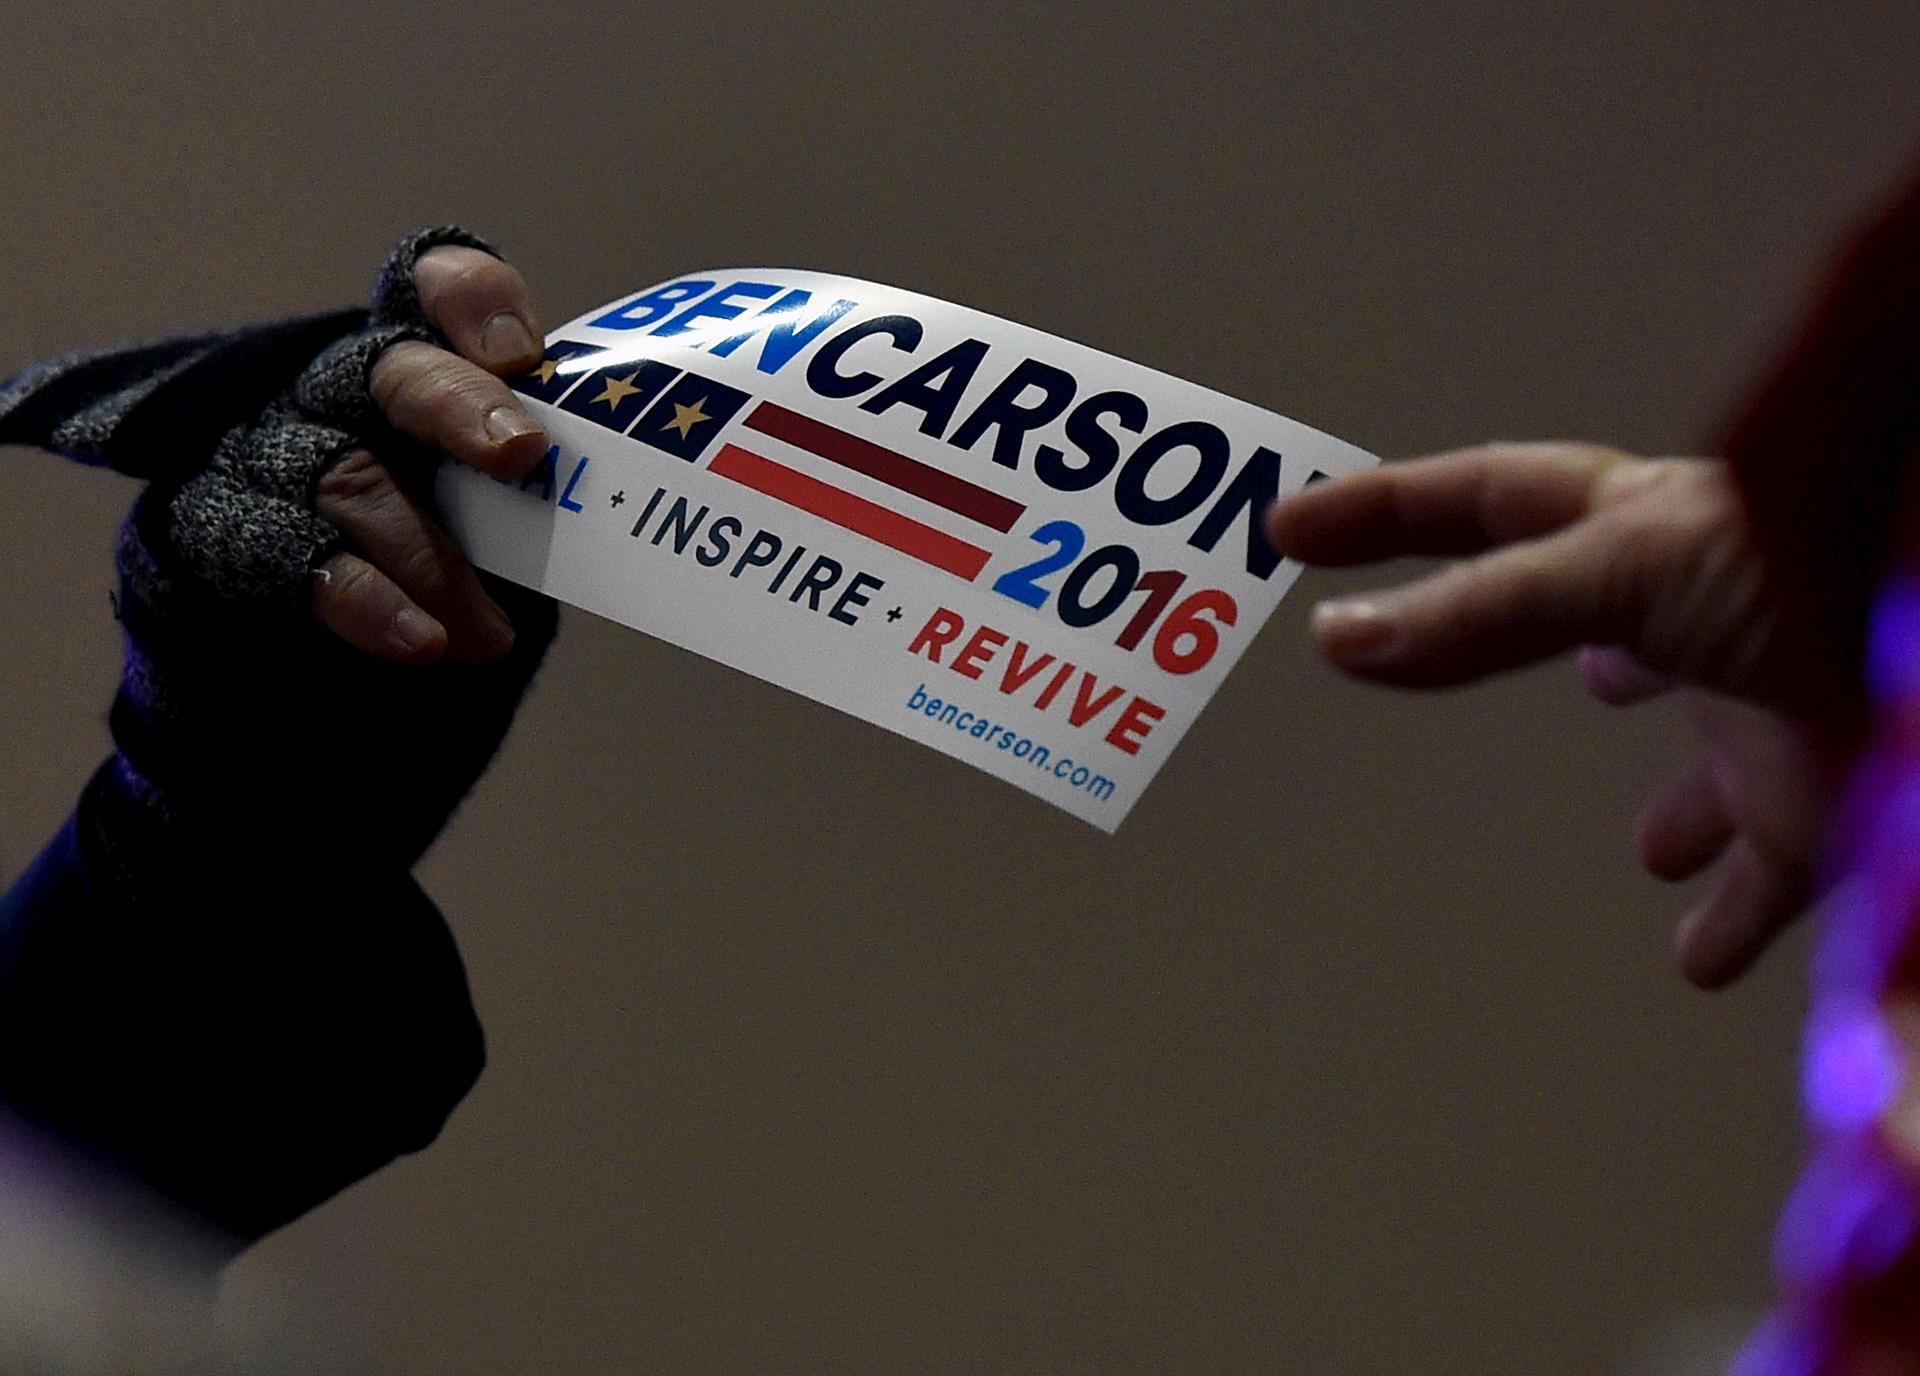 A bumper sticker is passed out before U.S. Republican presidential candidate Ben Carson speaks at a campaign event in Pahrump, Nevada.